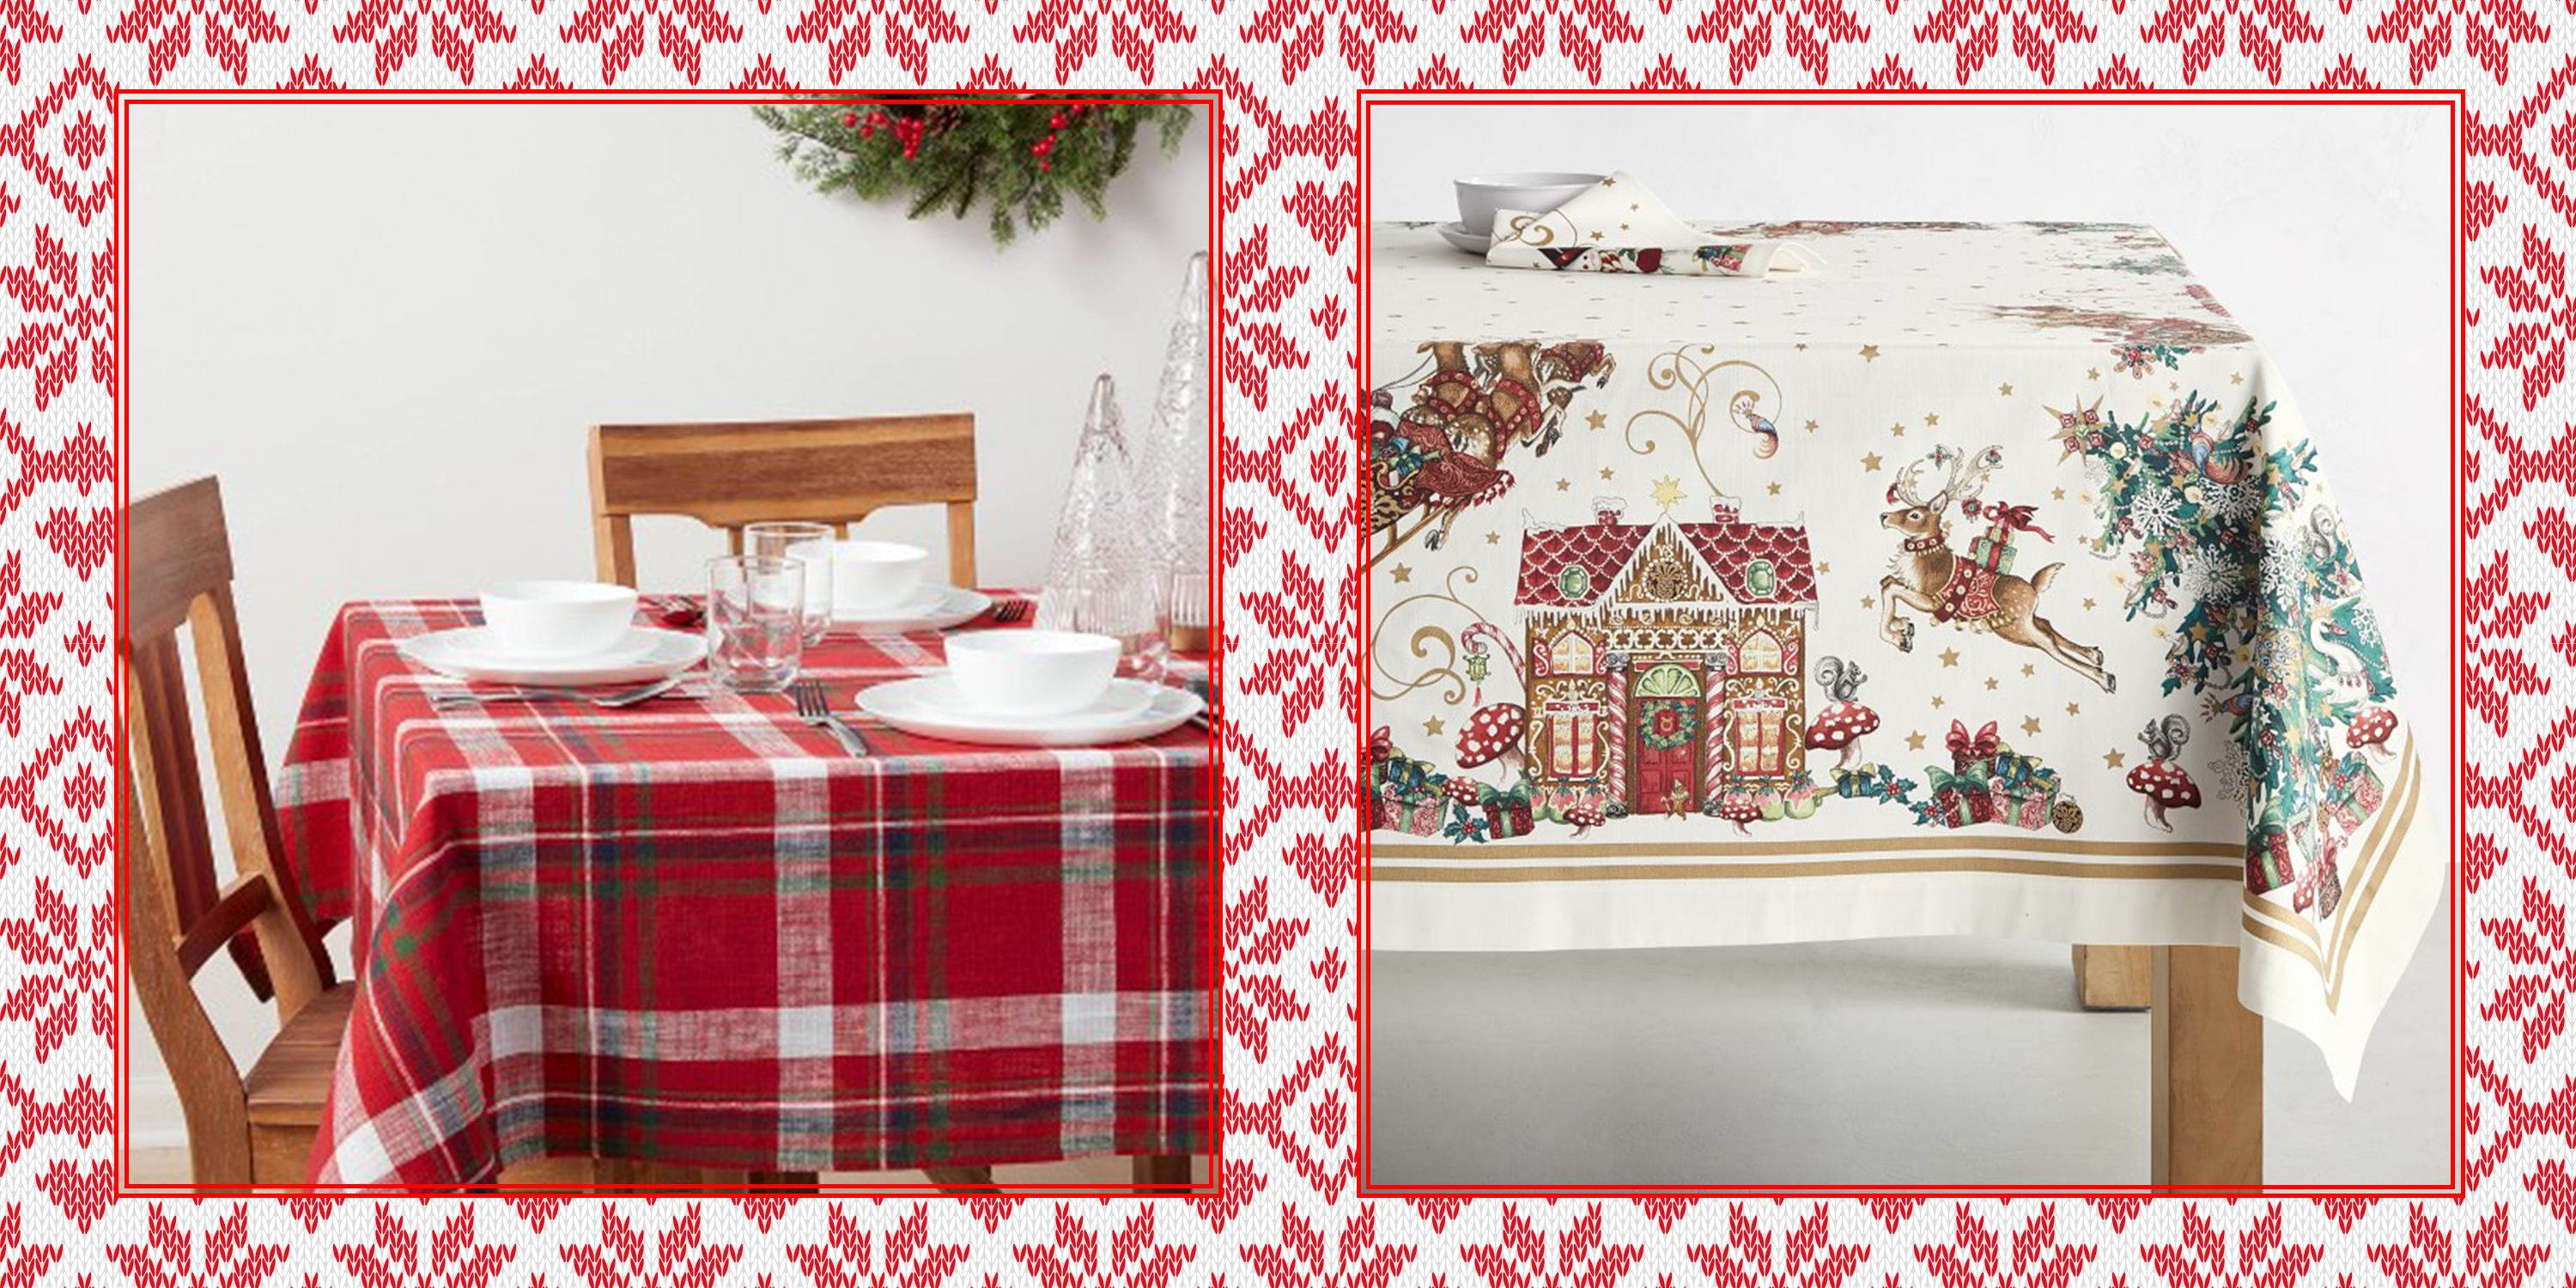 Winter Cardinal Bird Rectangle Table Cloth Linen Cover Placemat 60 W x 108 L for Kitchen Dining Room Party Wedding Wamika Christmas Snowman Snowflake Tablecloth Table Cover Mat Home Decoration